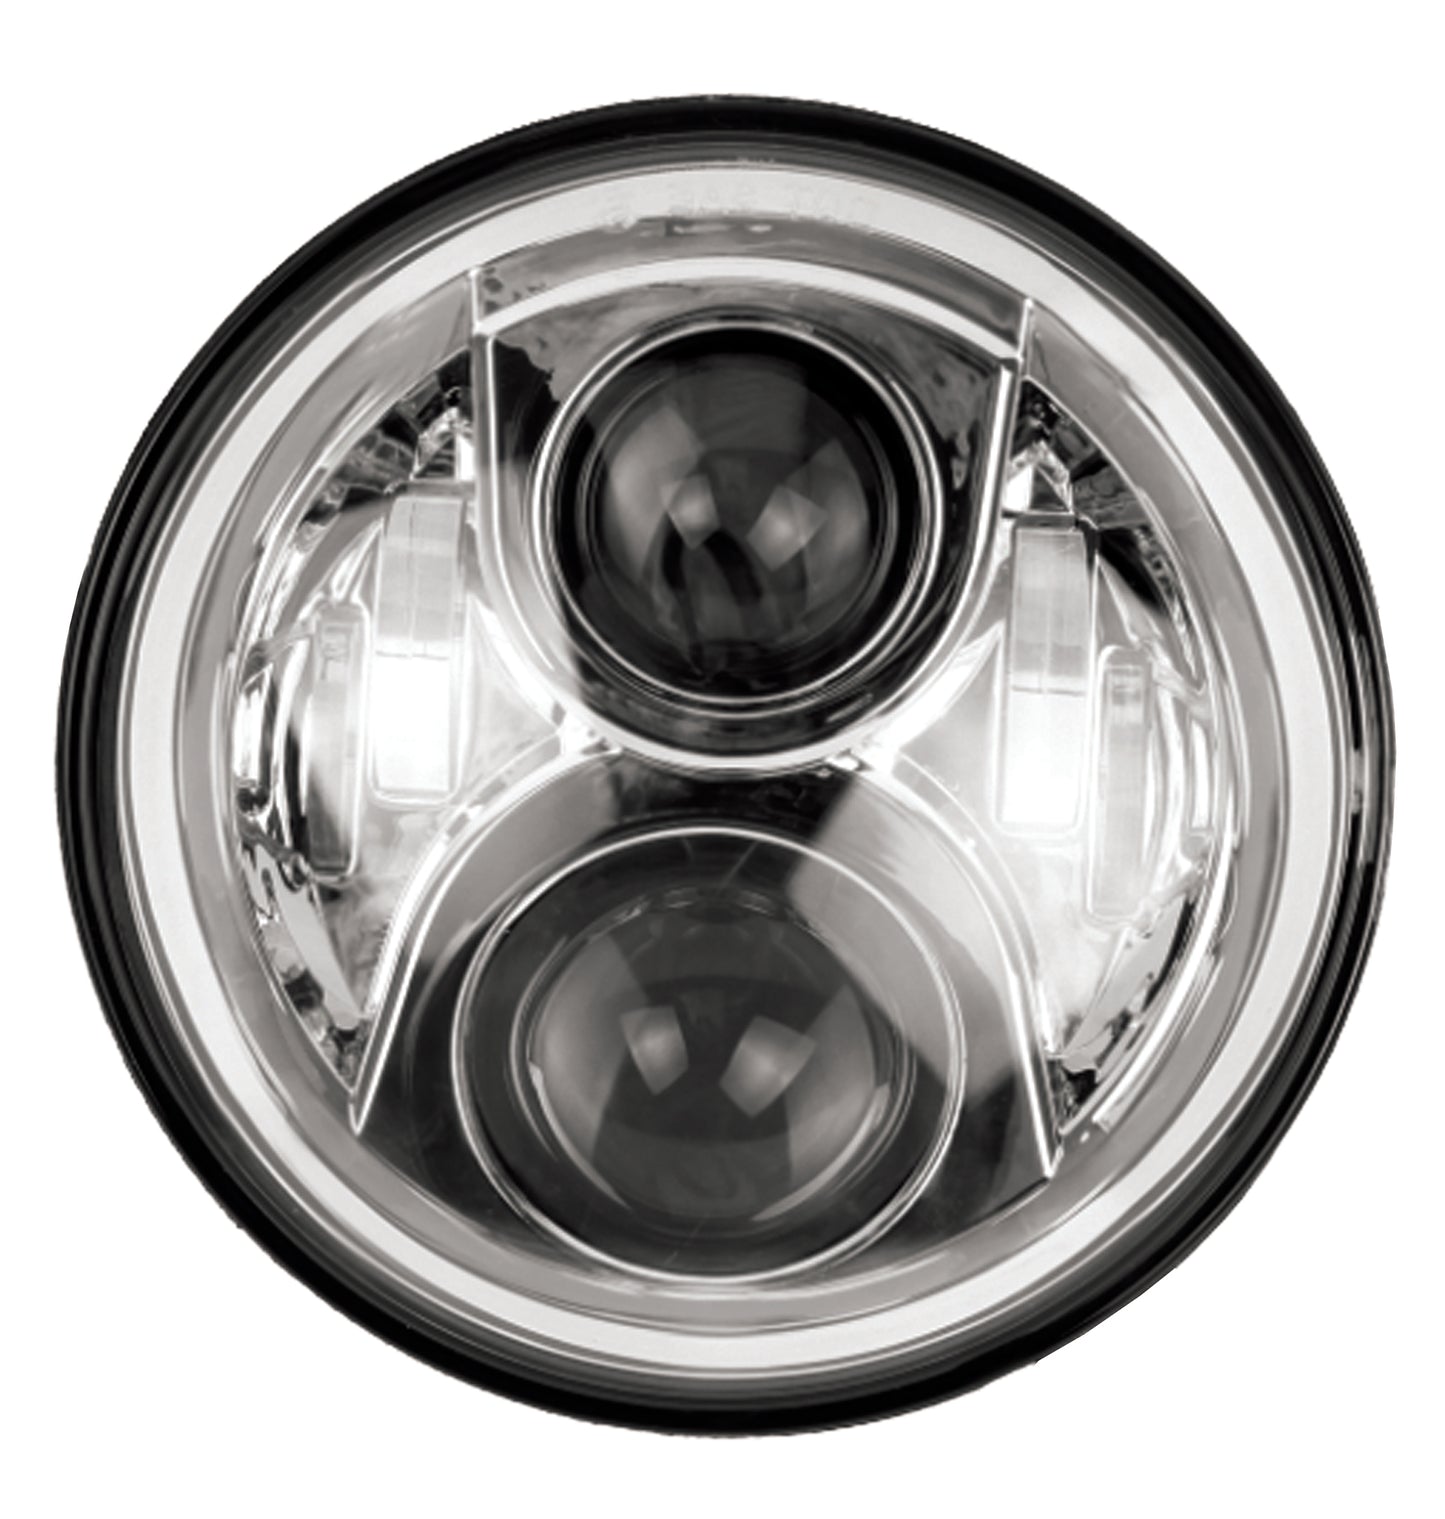 **SALE!! Offroad 7" LED Replacement Headlight for Motorcycle or Jeep